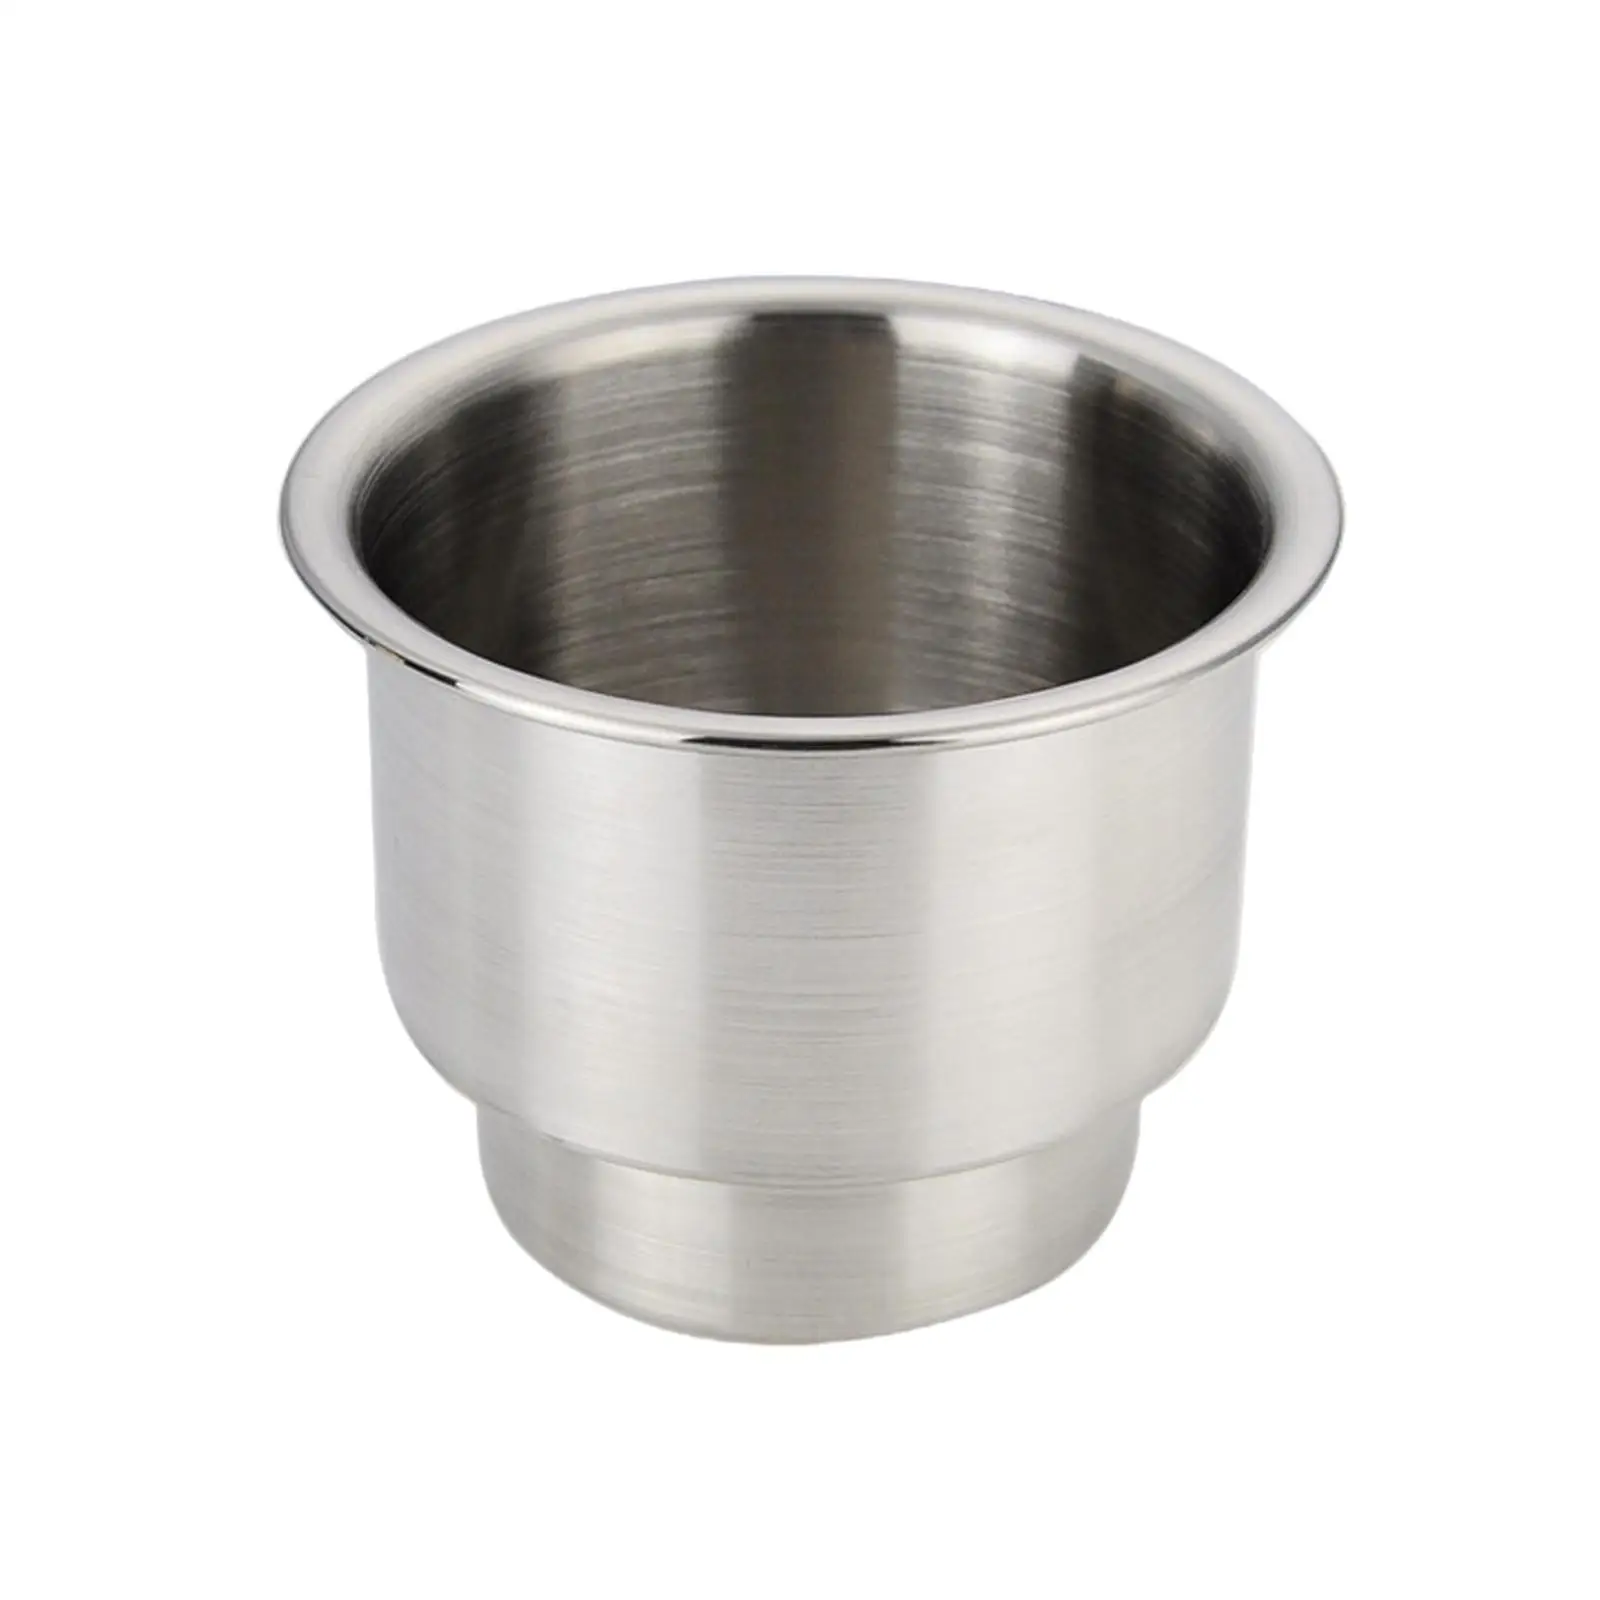 Cup Drink Holder Stainless Steel Drink Water Bottle Holder for Car Accessories